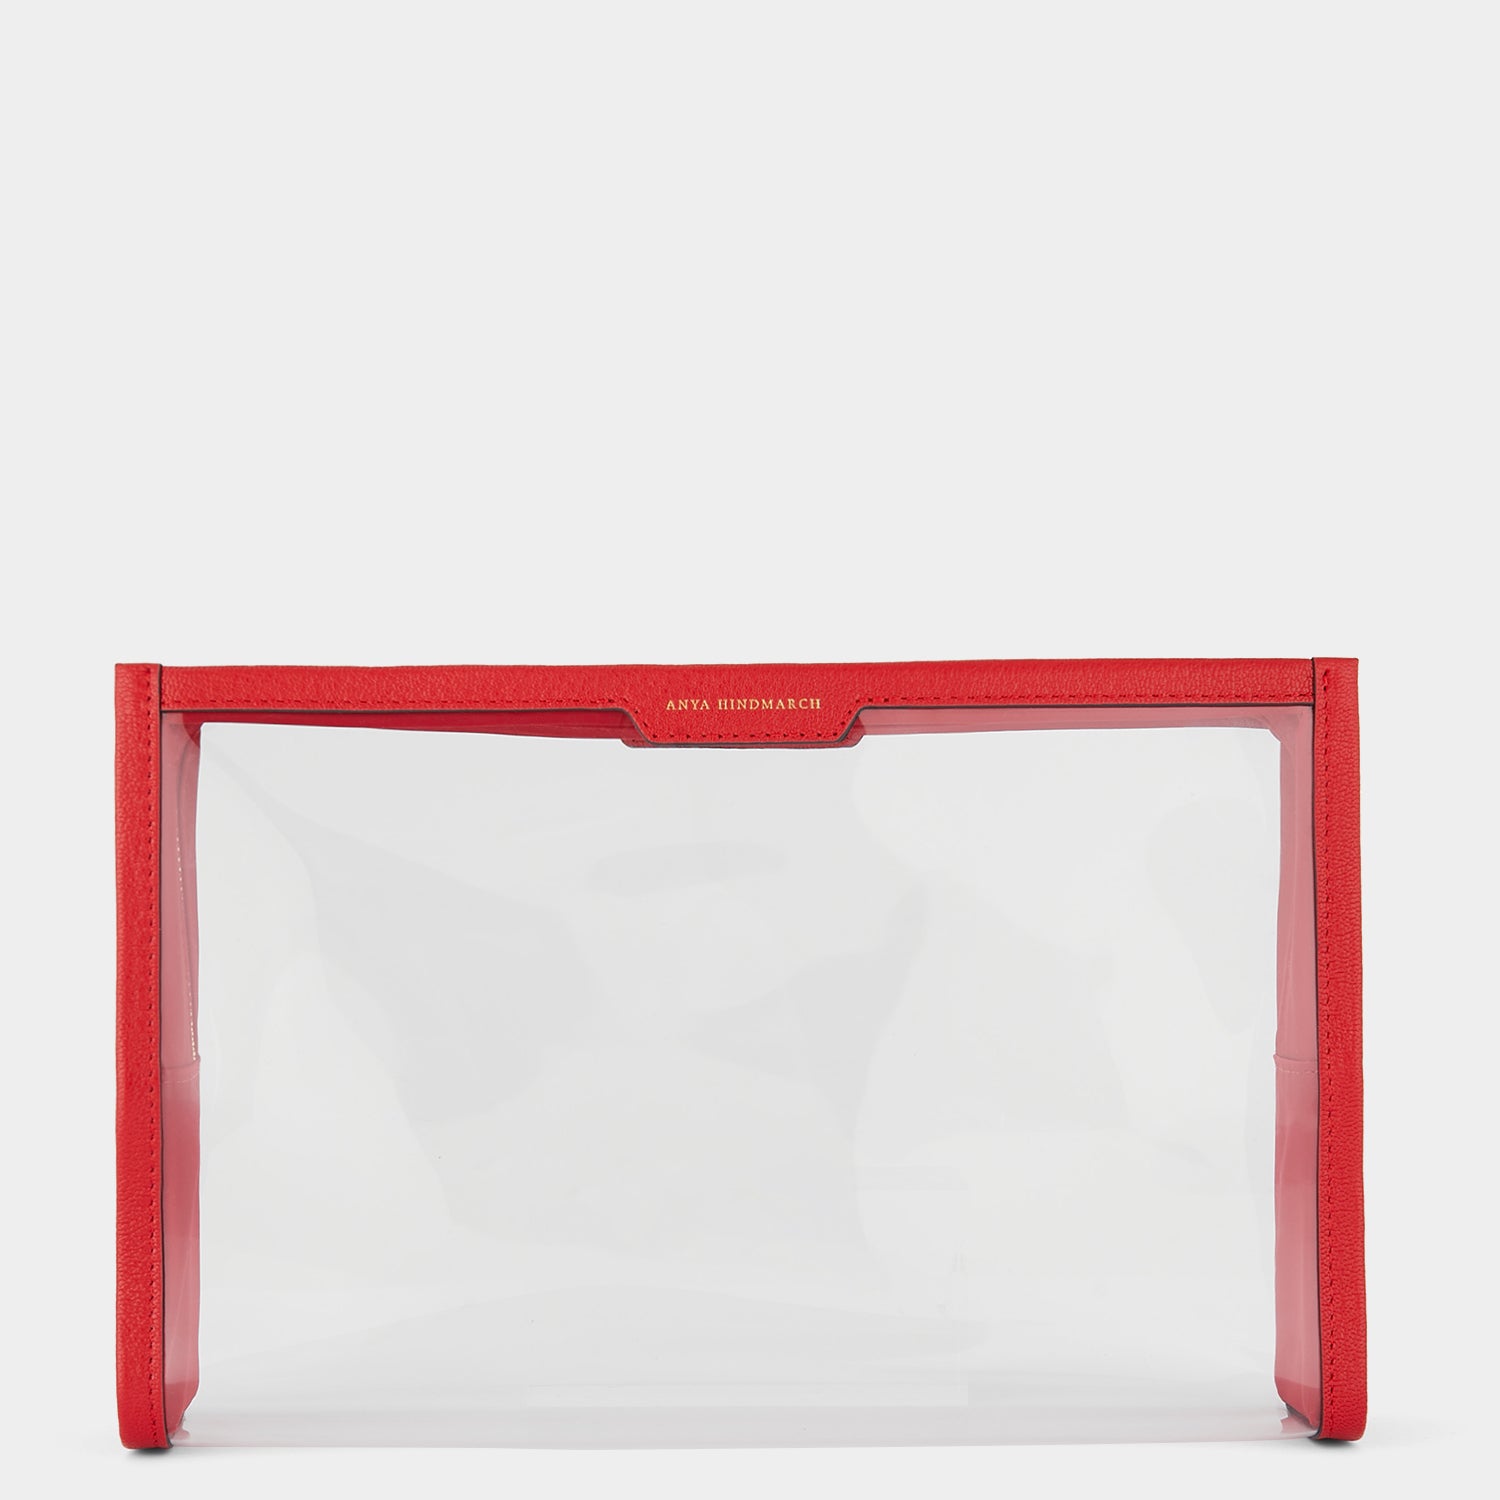 Big Things Pouch -

                  
                    Capra Leather in Red -
                  

                  Anya Hindmarch UK
